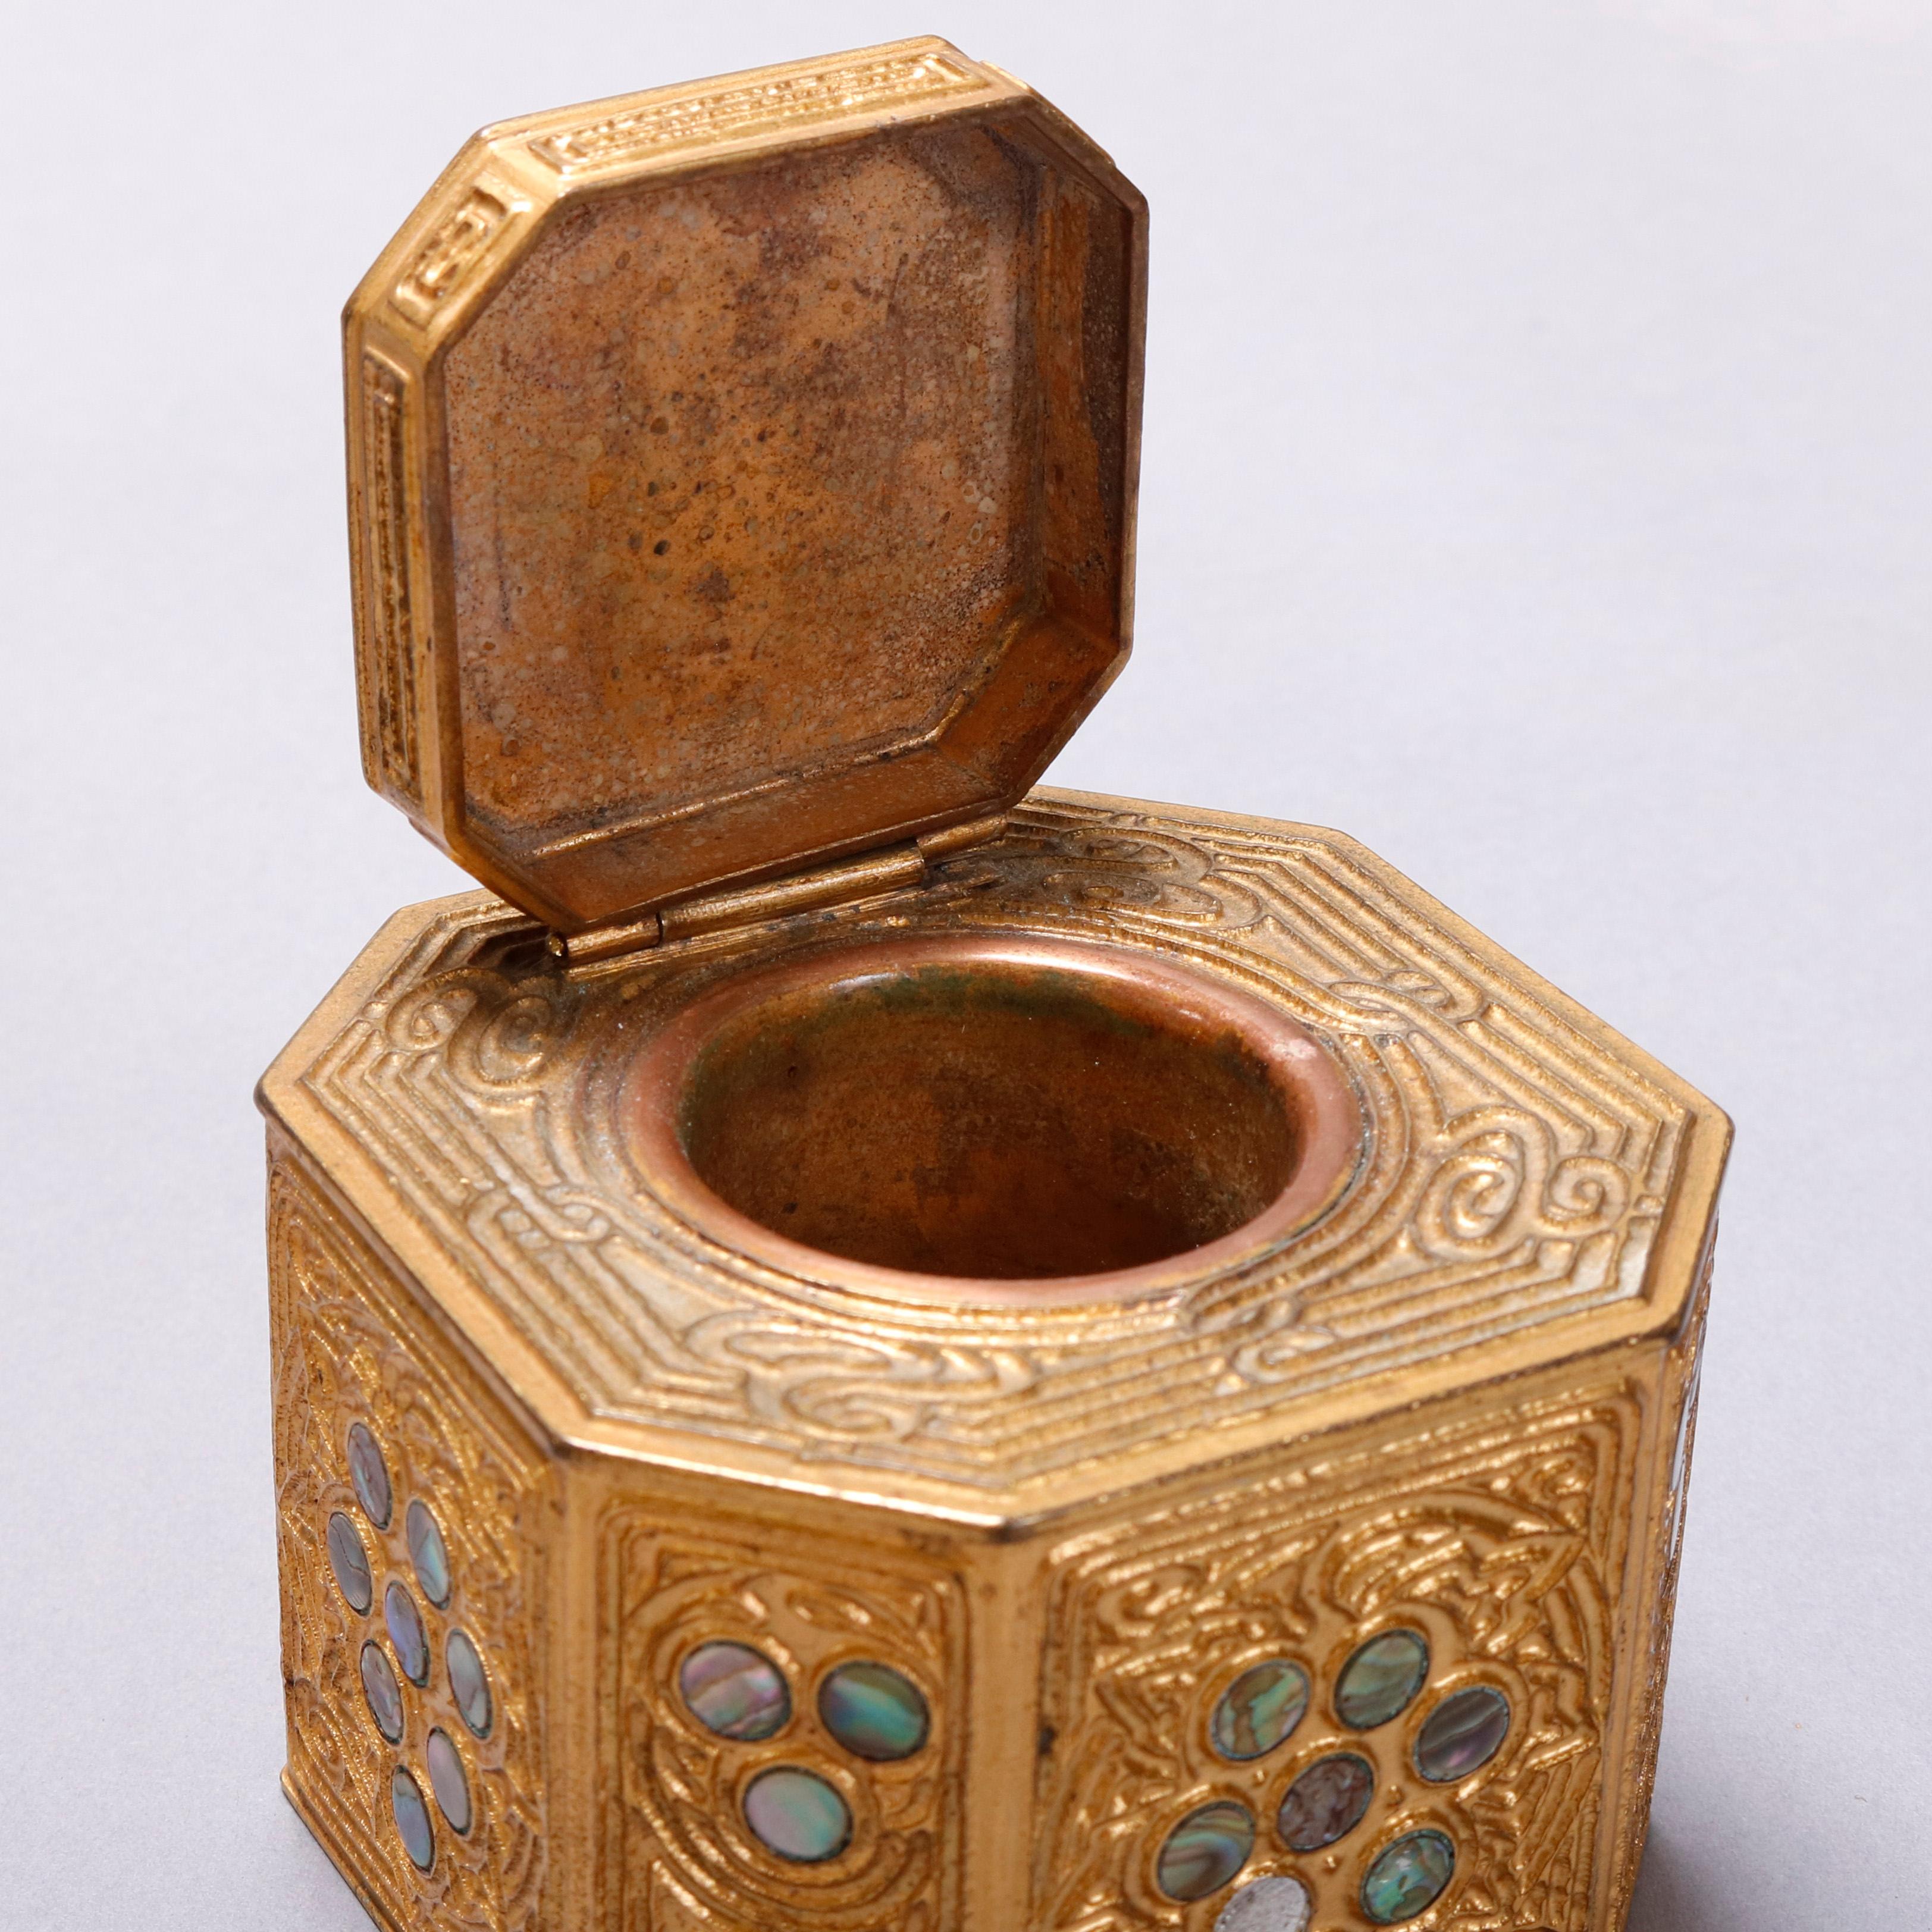 An antique Arts & Crafts inkwell by Tiffany & Co. in 